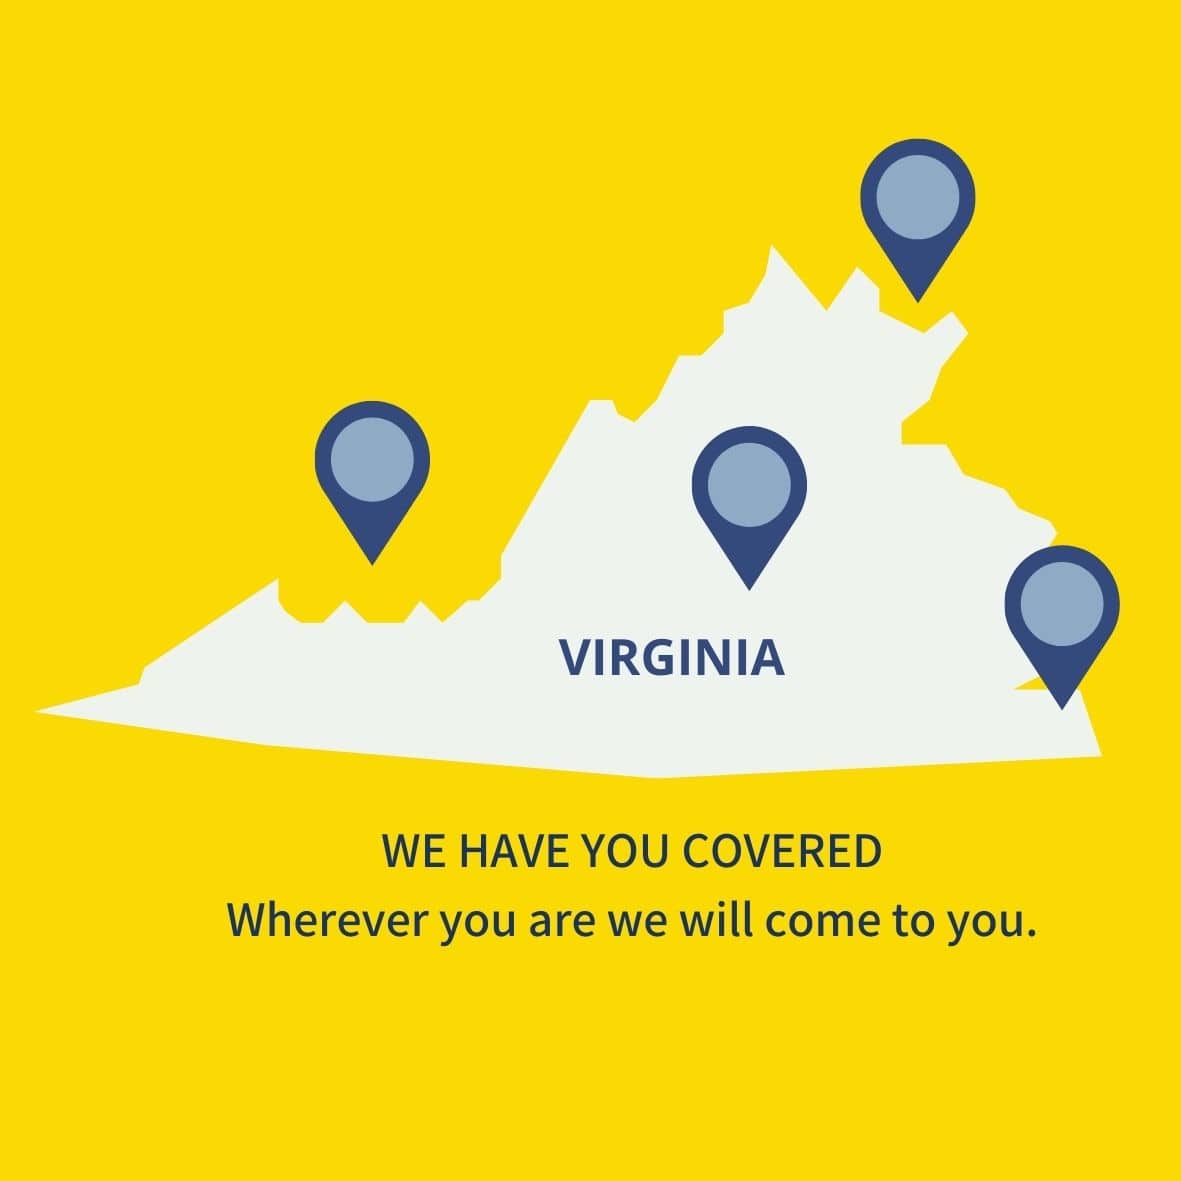 Virginia Car Accident Lawyer - We Will Come to You